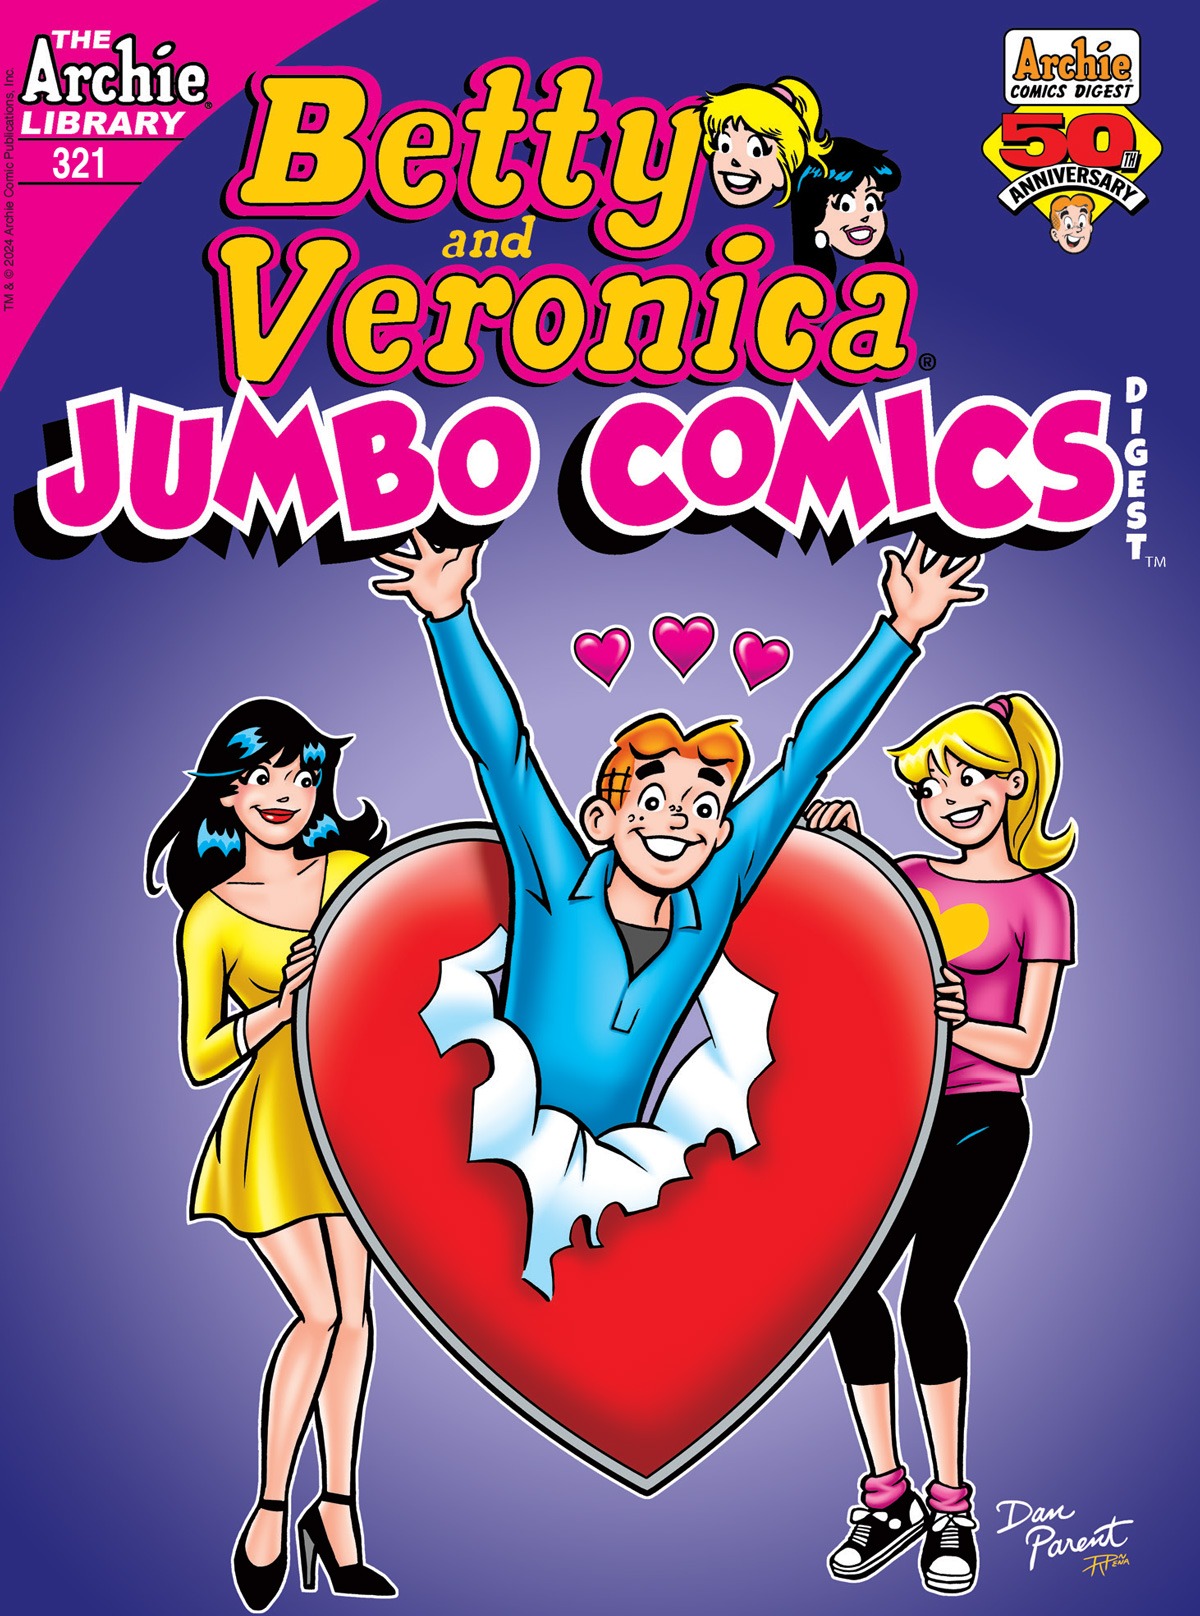 Cover of Betty and Veronica Jumbo Comics Digest #321, showing Archie bursting through a valentine held by Veronica and Betty